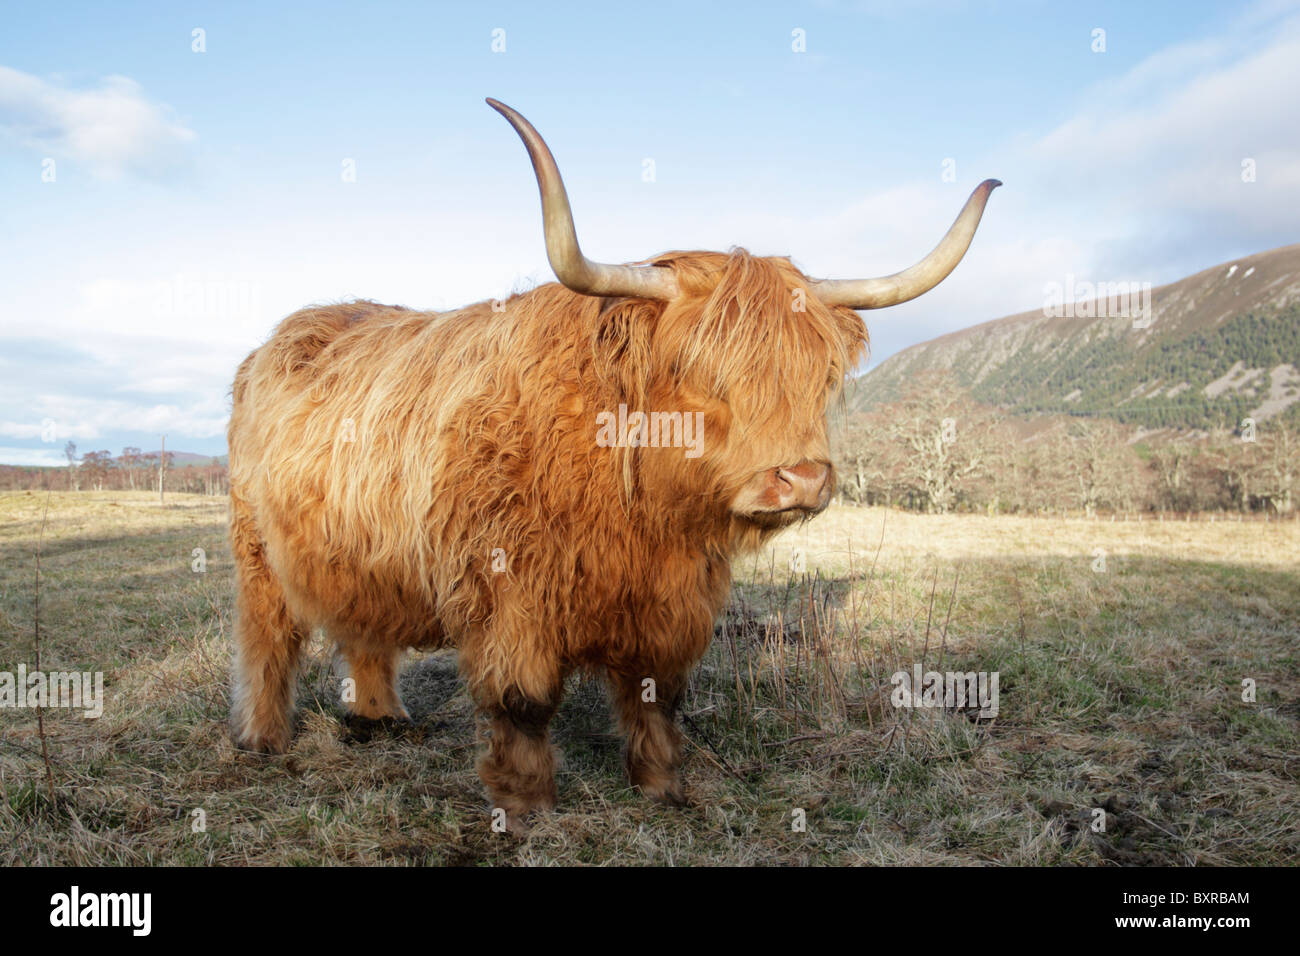 Highland cattle standing among rough grasses which is their preferred grazing habitat with Scottish mountains in the distance Stock Photo